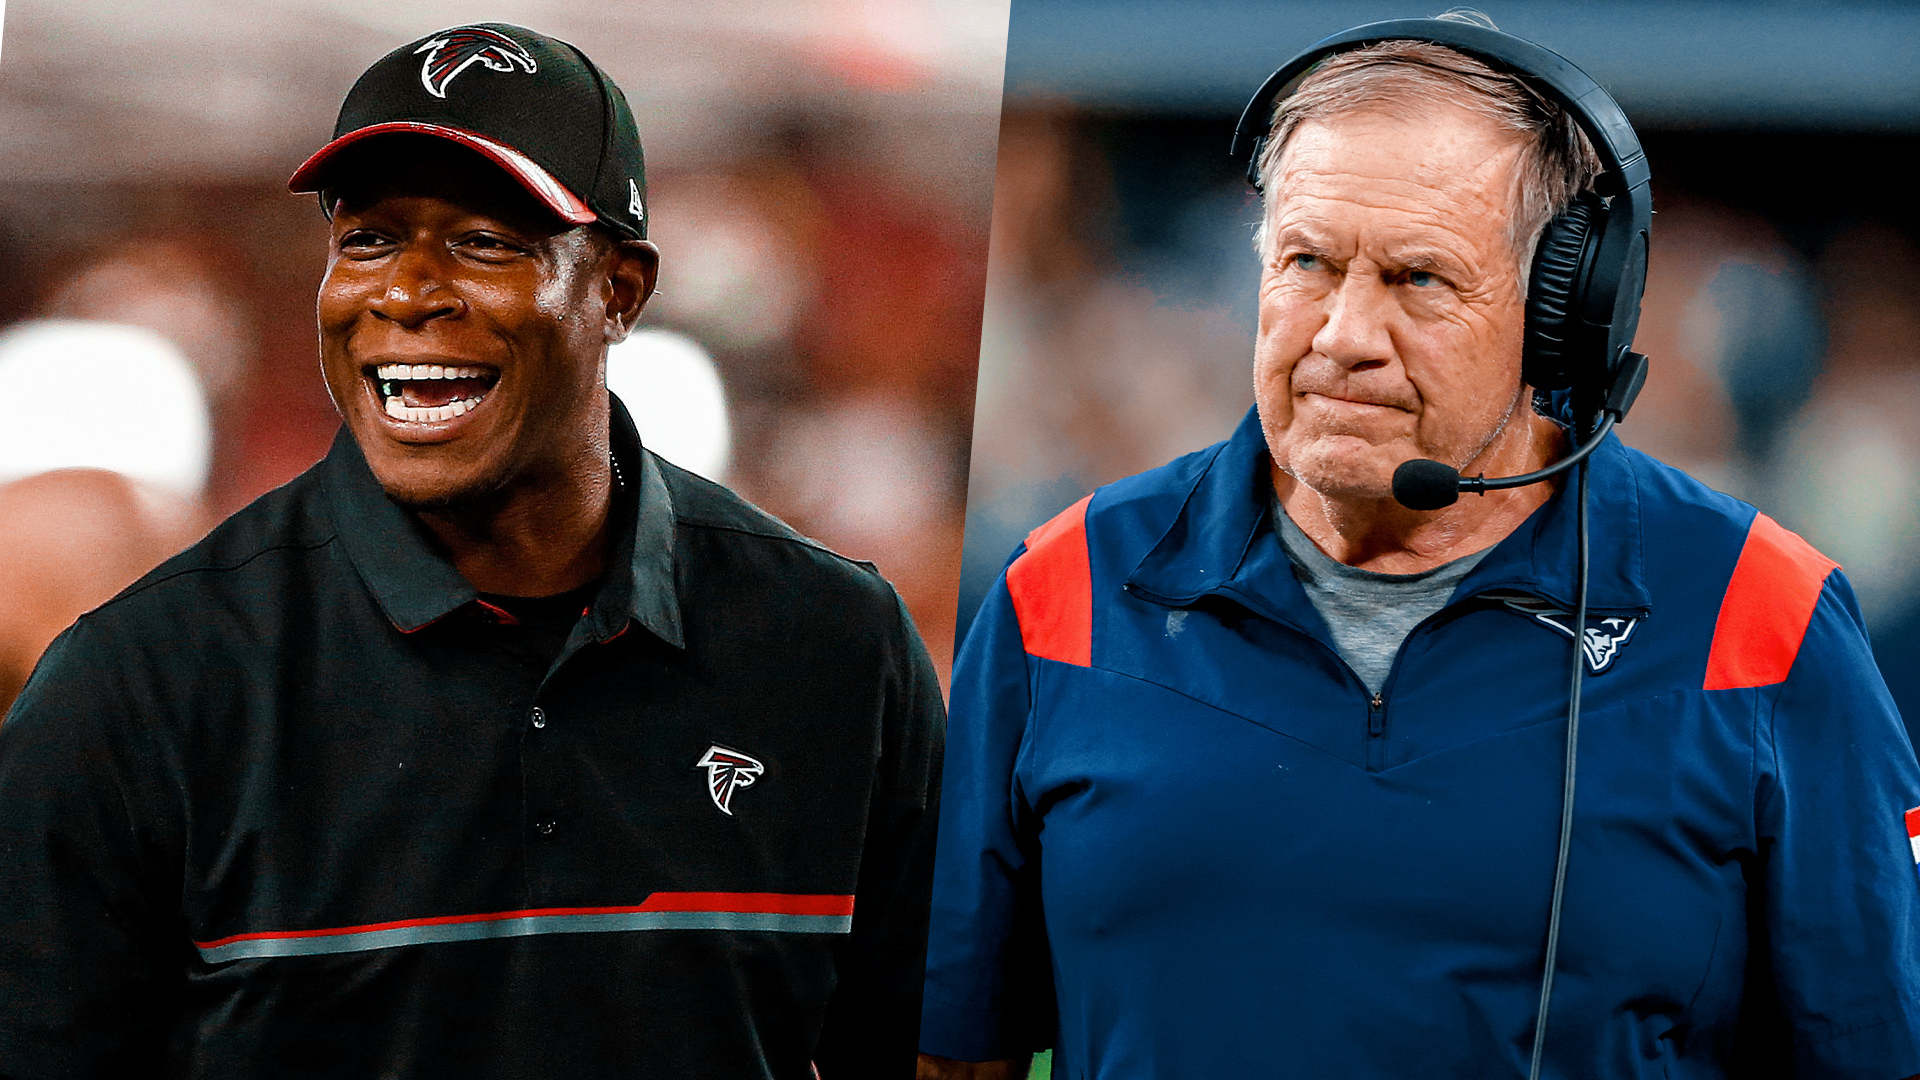 Cover image of Raheem Morris (left) and Bill Belichick (right)